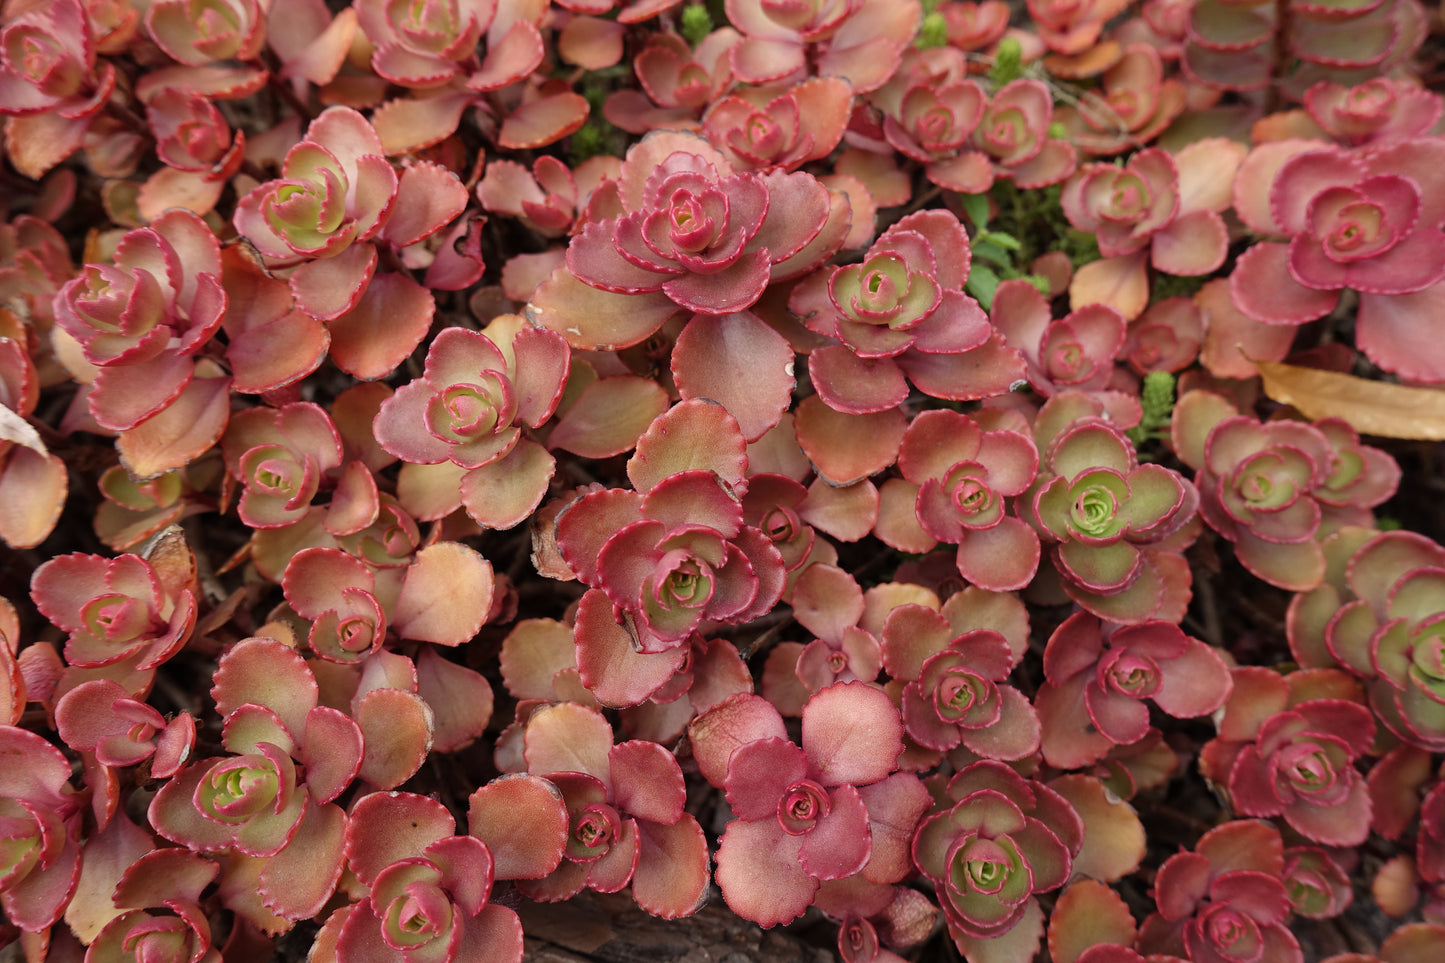 150 MIXED SEDUM Stonecrop Succulent Groundcover Red White Yellow Pink Purple Flower Seeds